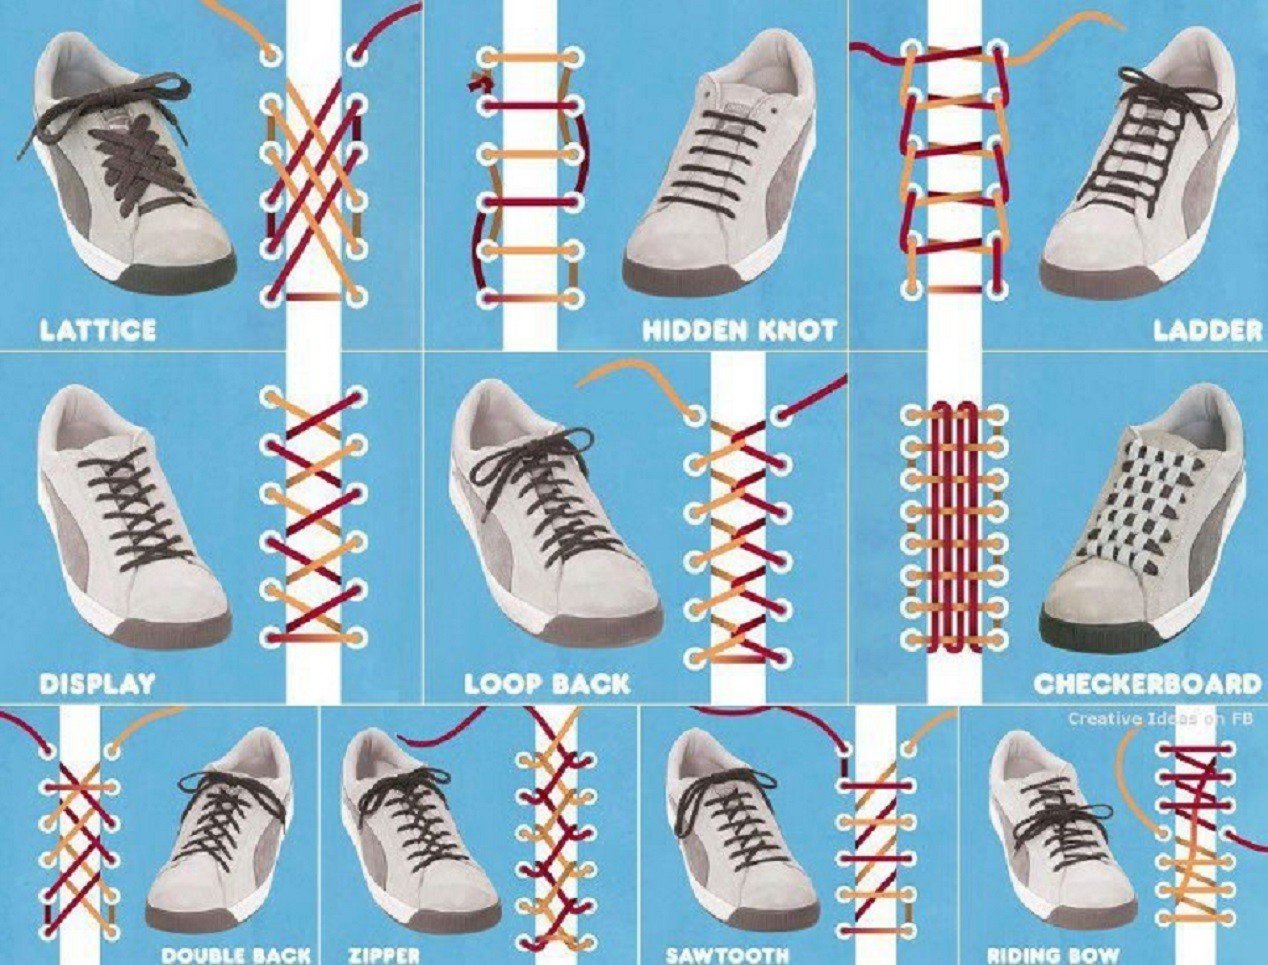 10 Lace Your Shoes Creatively - LifeHack